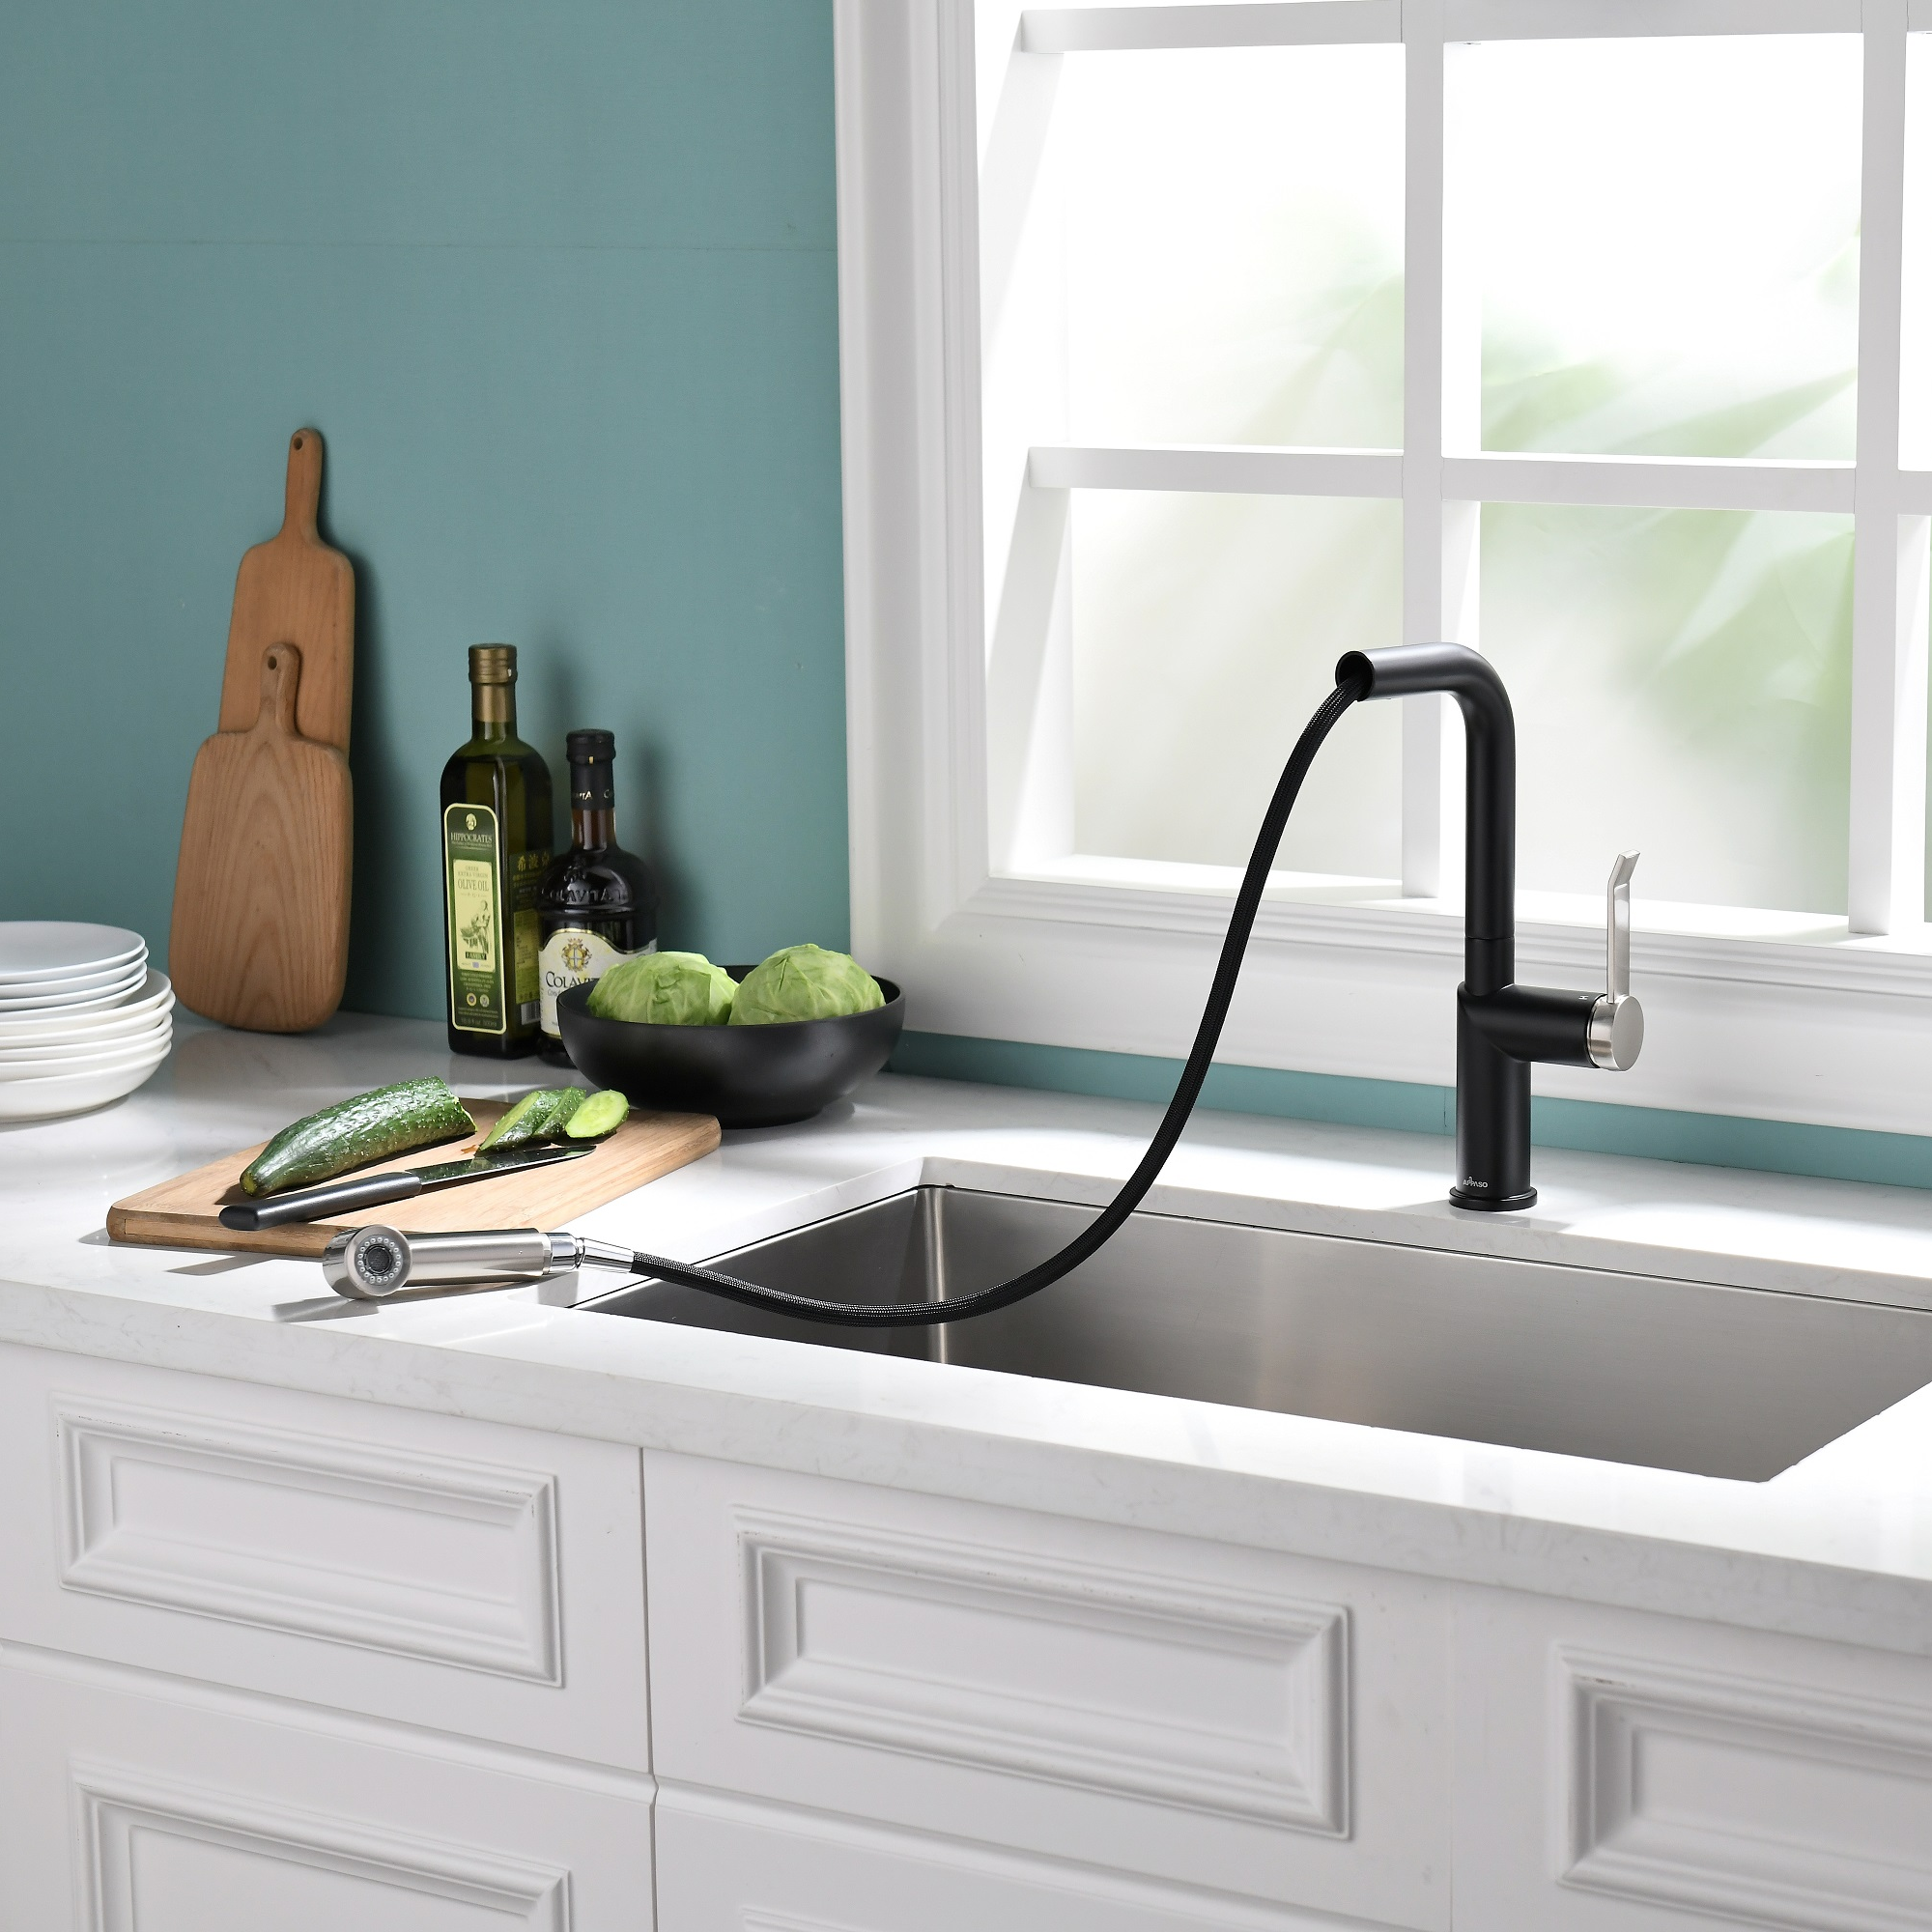 Modern Style Brushed Nickle+Black Pull-Out Kitchen Faucet